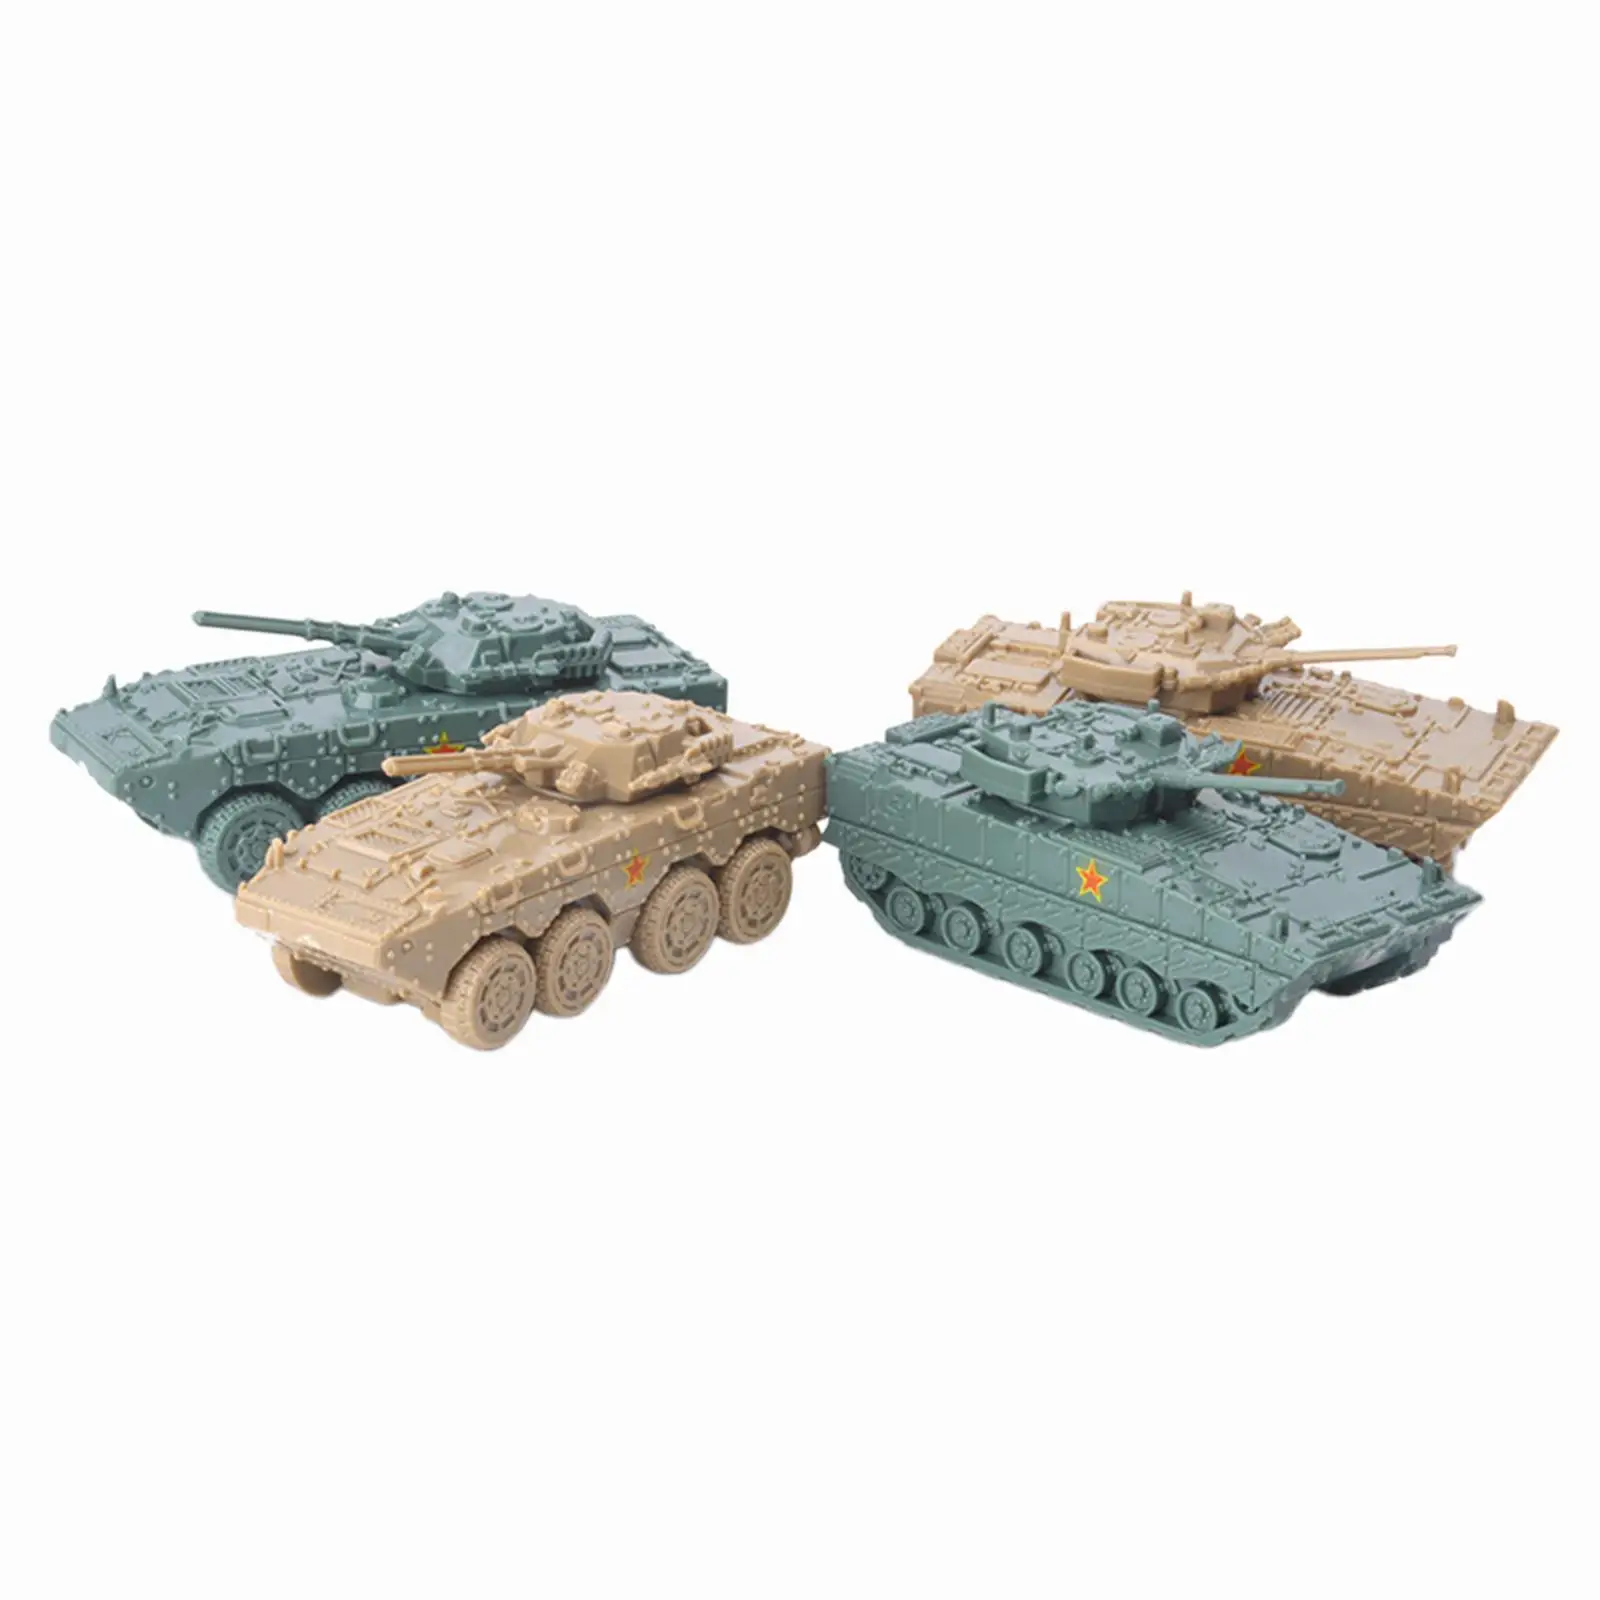 1:144 Scale Tank Model Desk Decor Education Toy Miniature Tank Model Mini Vehicles for Children Kids Boys Toddlers Holiday Gifts